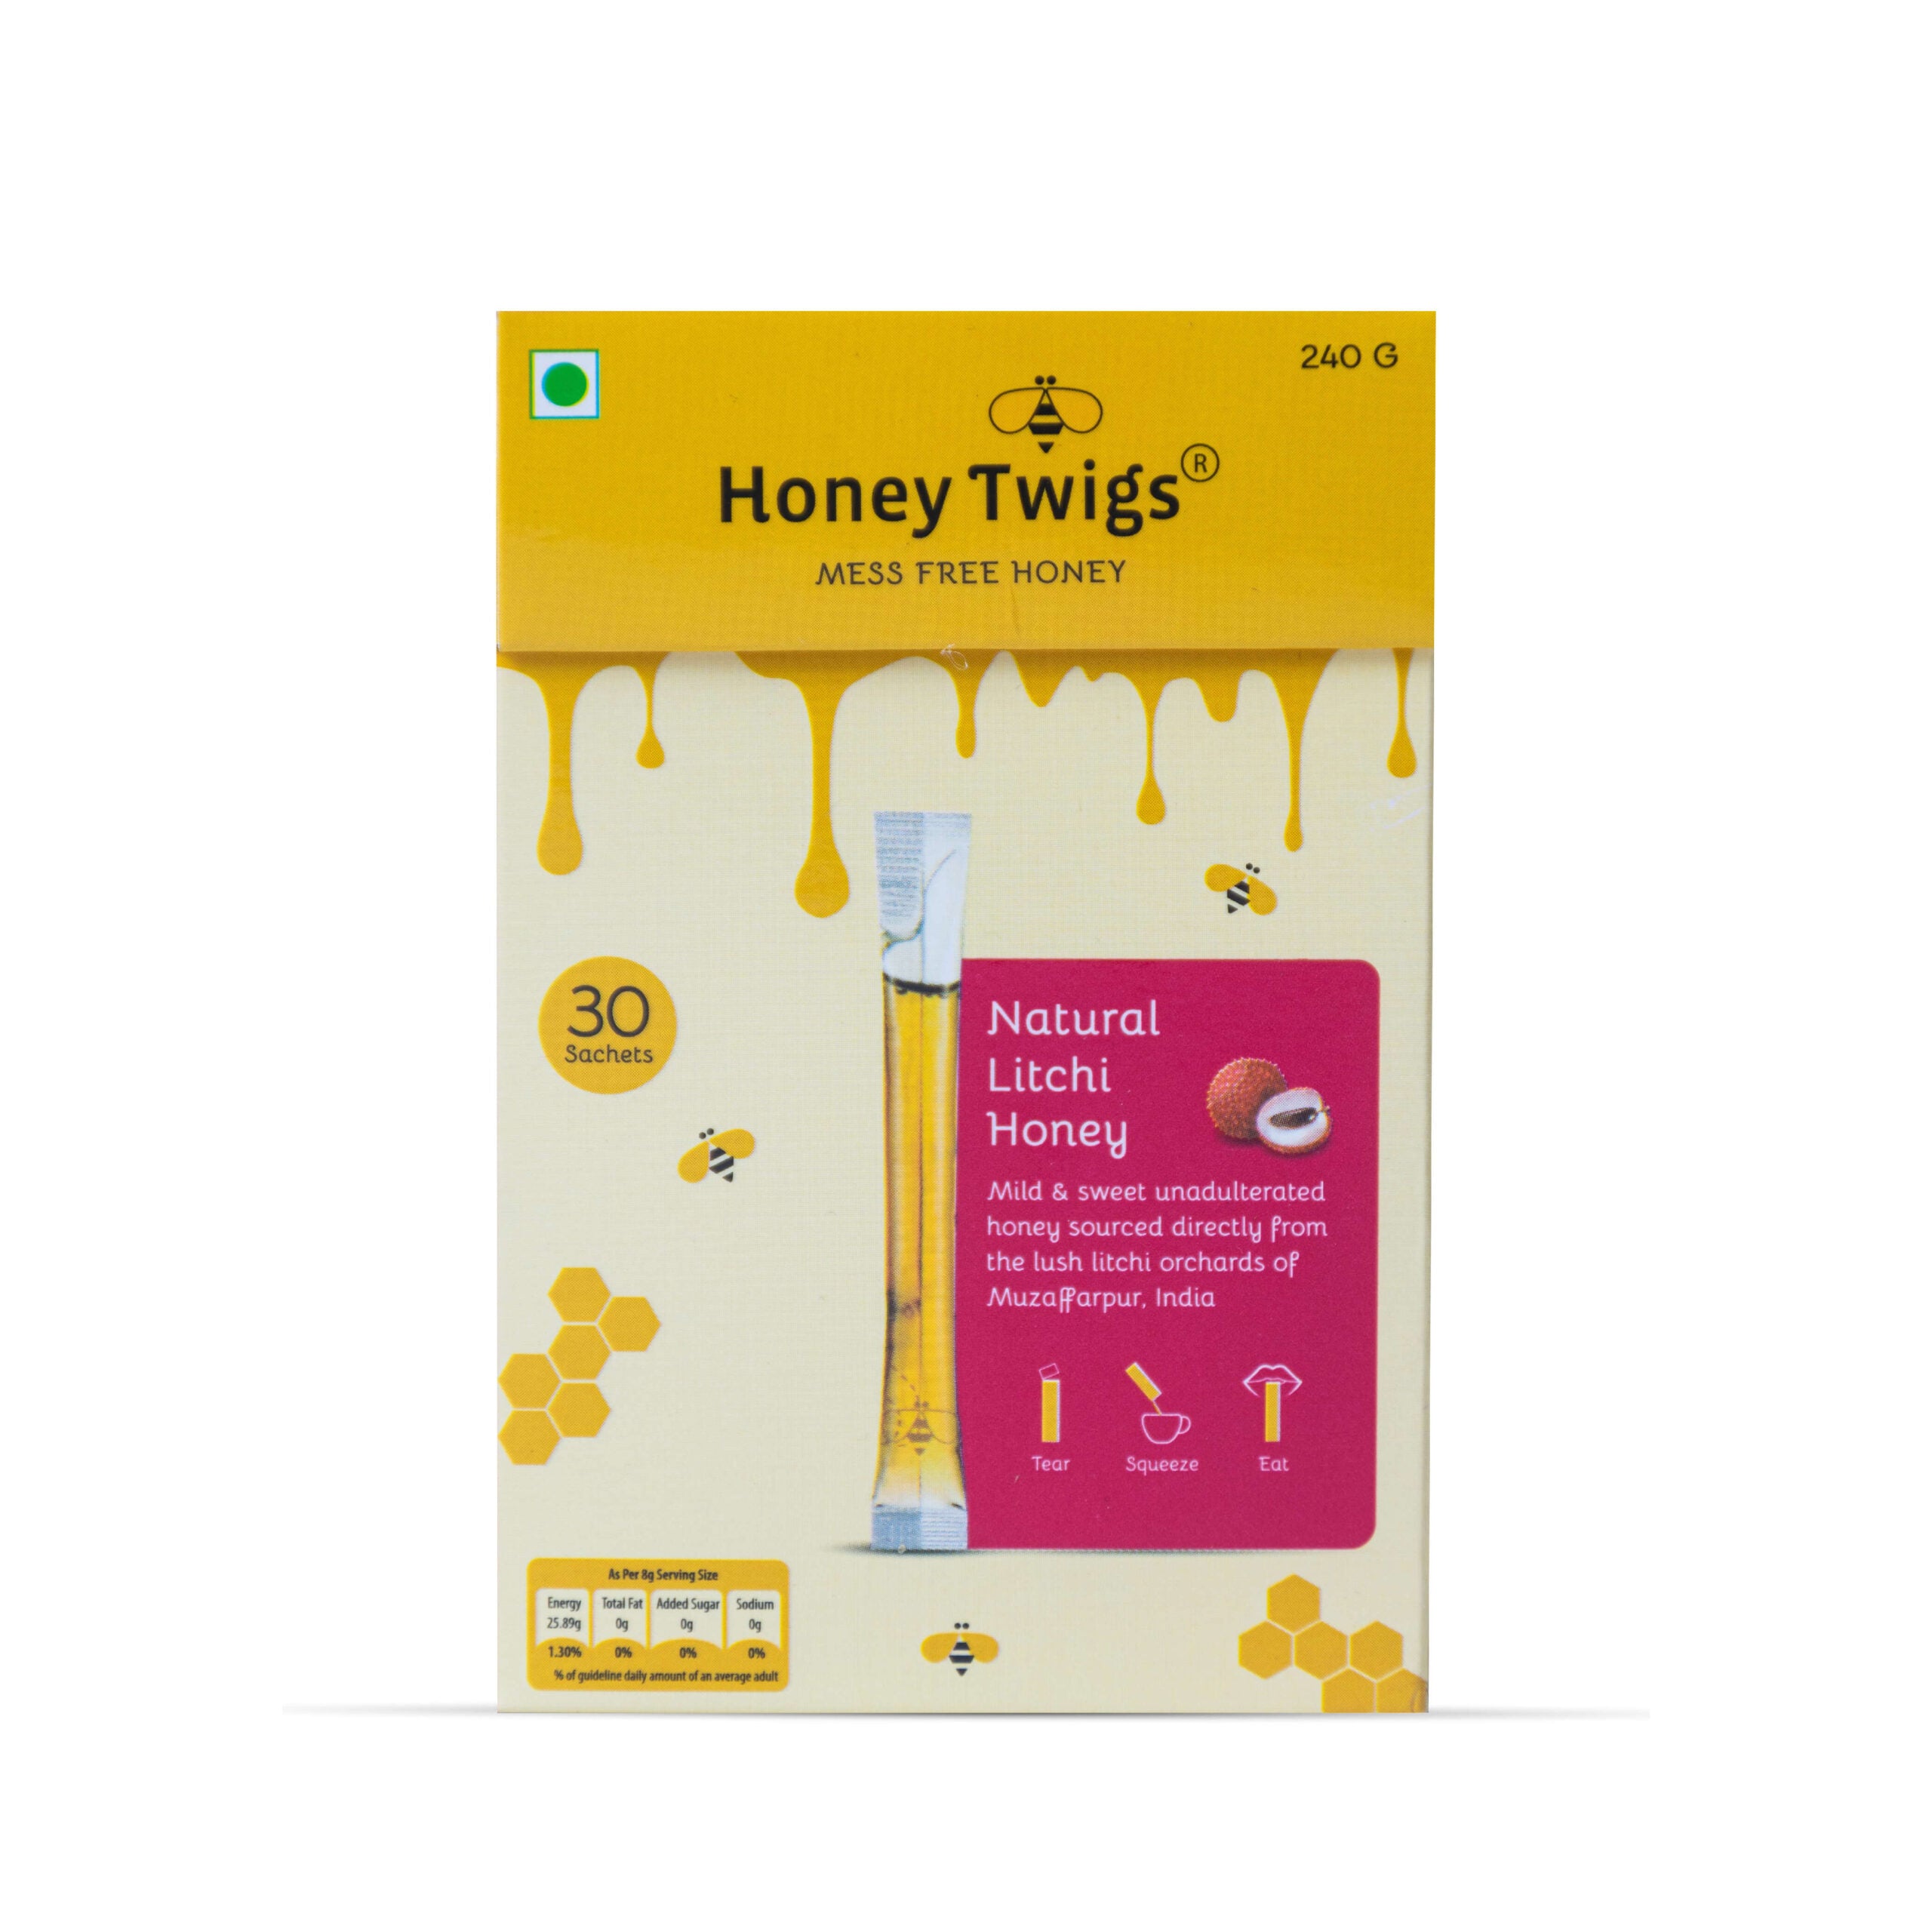 HONEY TWIGS Natural Litchi Honey, 240g - Pack of 30 Sachets